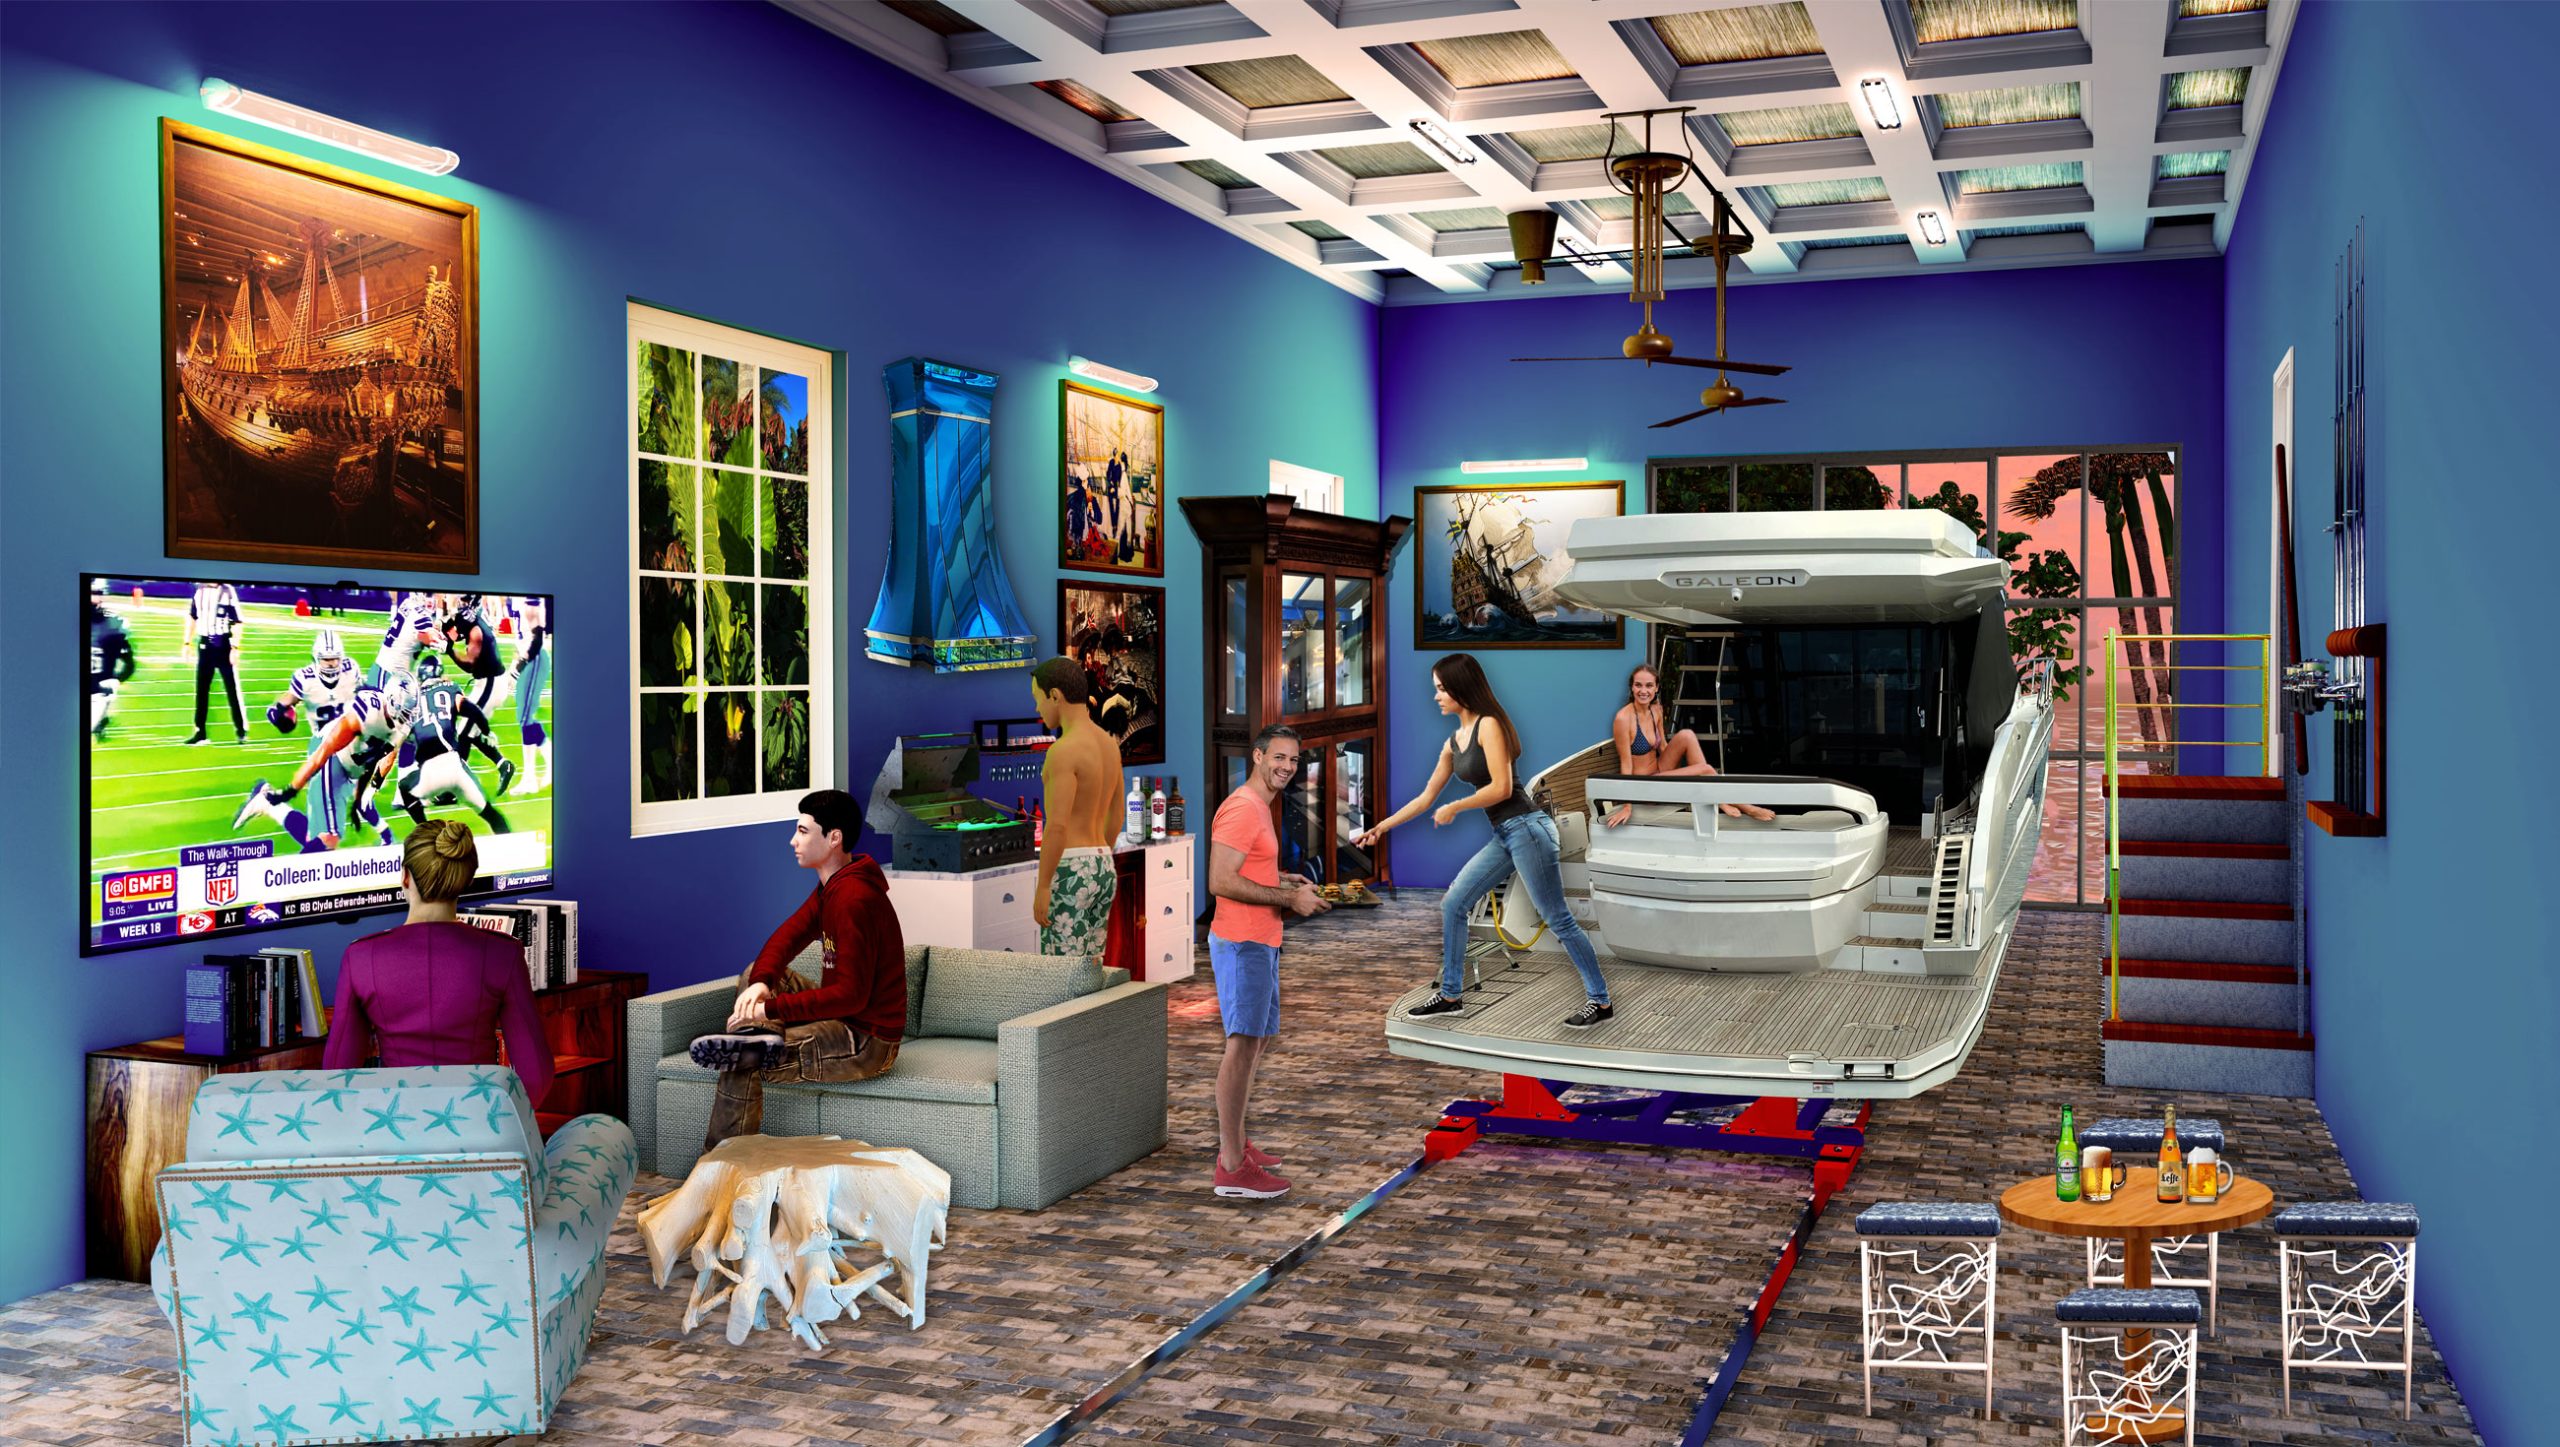 Rendering of the Cruise Party Room option for the Boat Trolley System